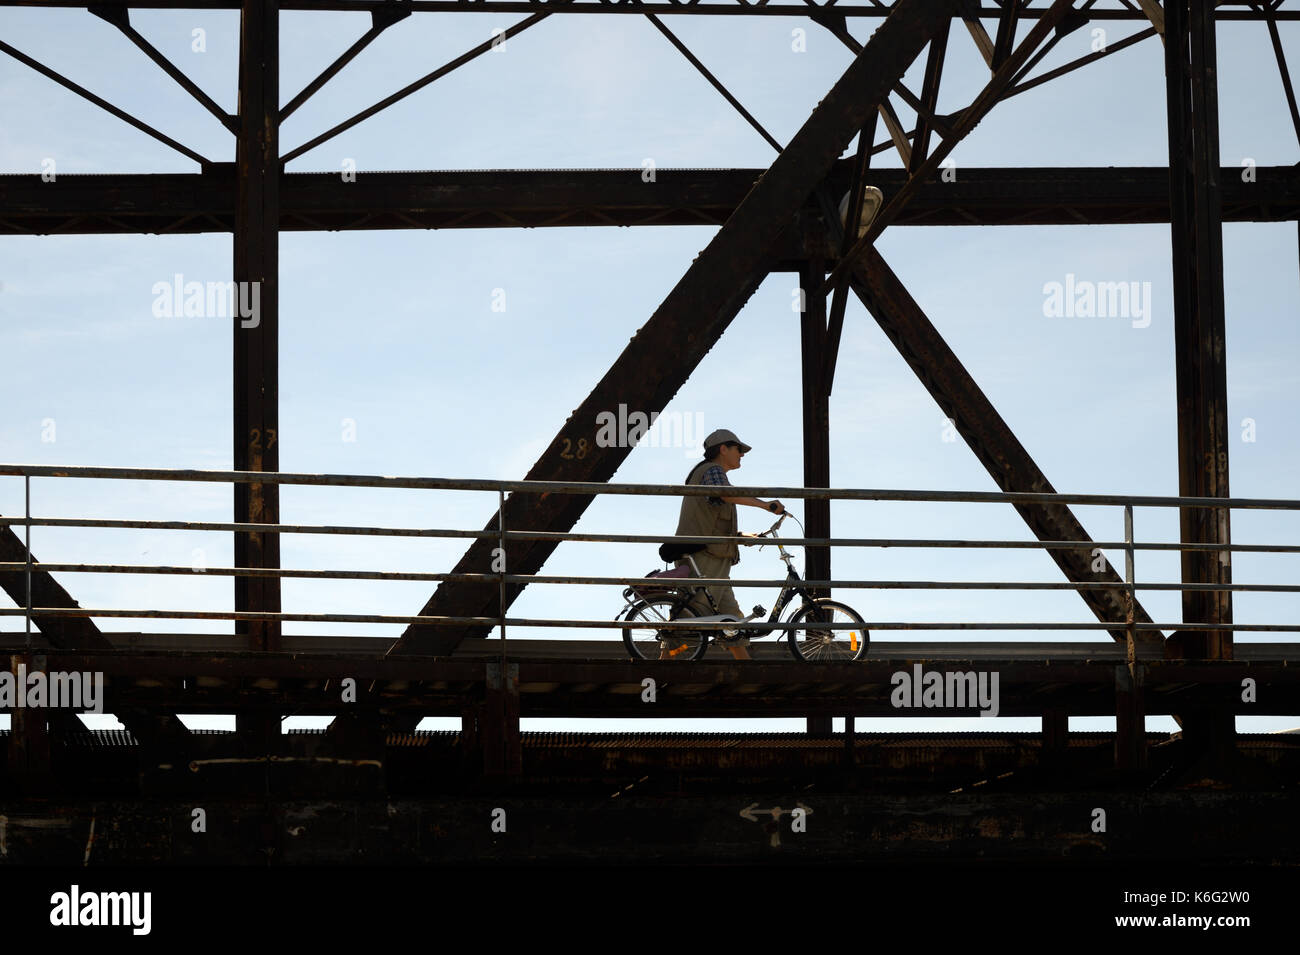 Man & Bicycle Crossing Iron-Framed or Iron Bridge over Canal at Sète or Sete, Hérault, Languedoc-Roussillon, France Stock Photo